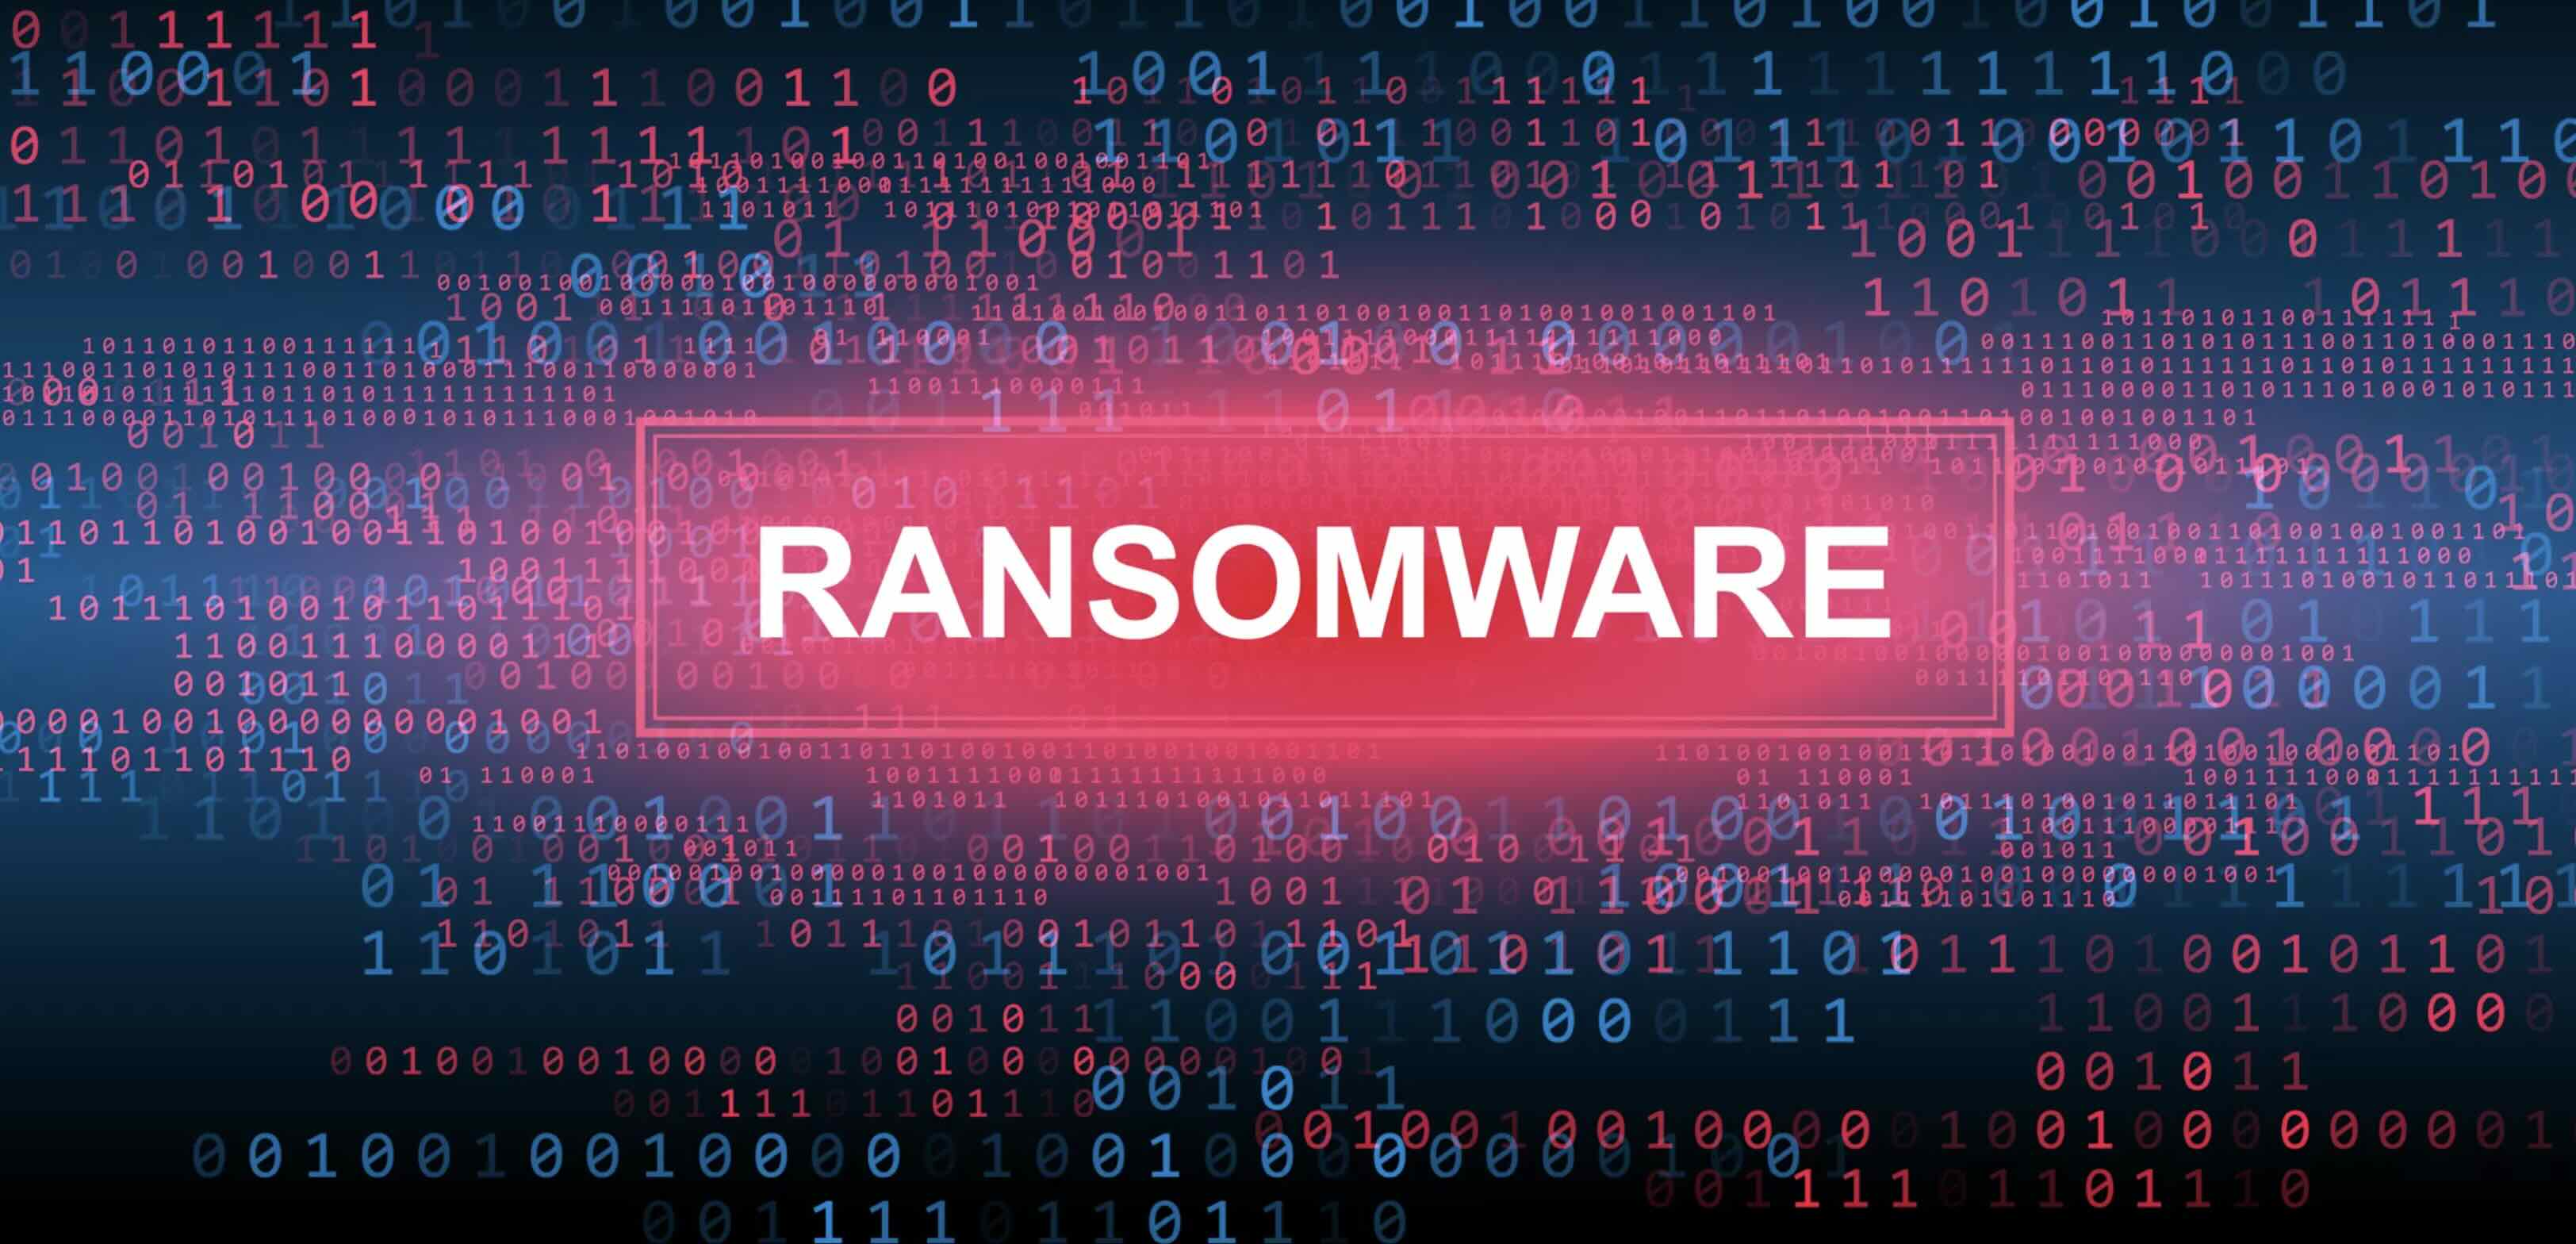 How An Intrusion Detection Can Protect Against Ransomware